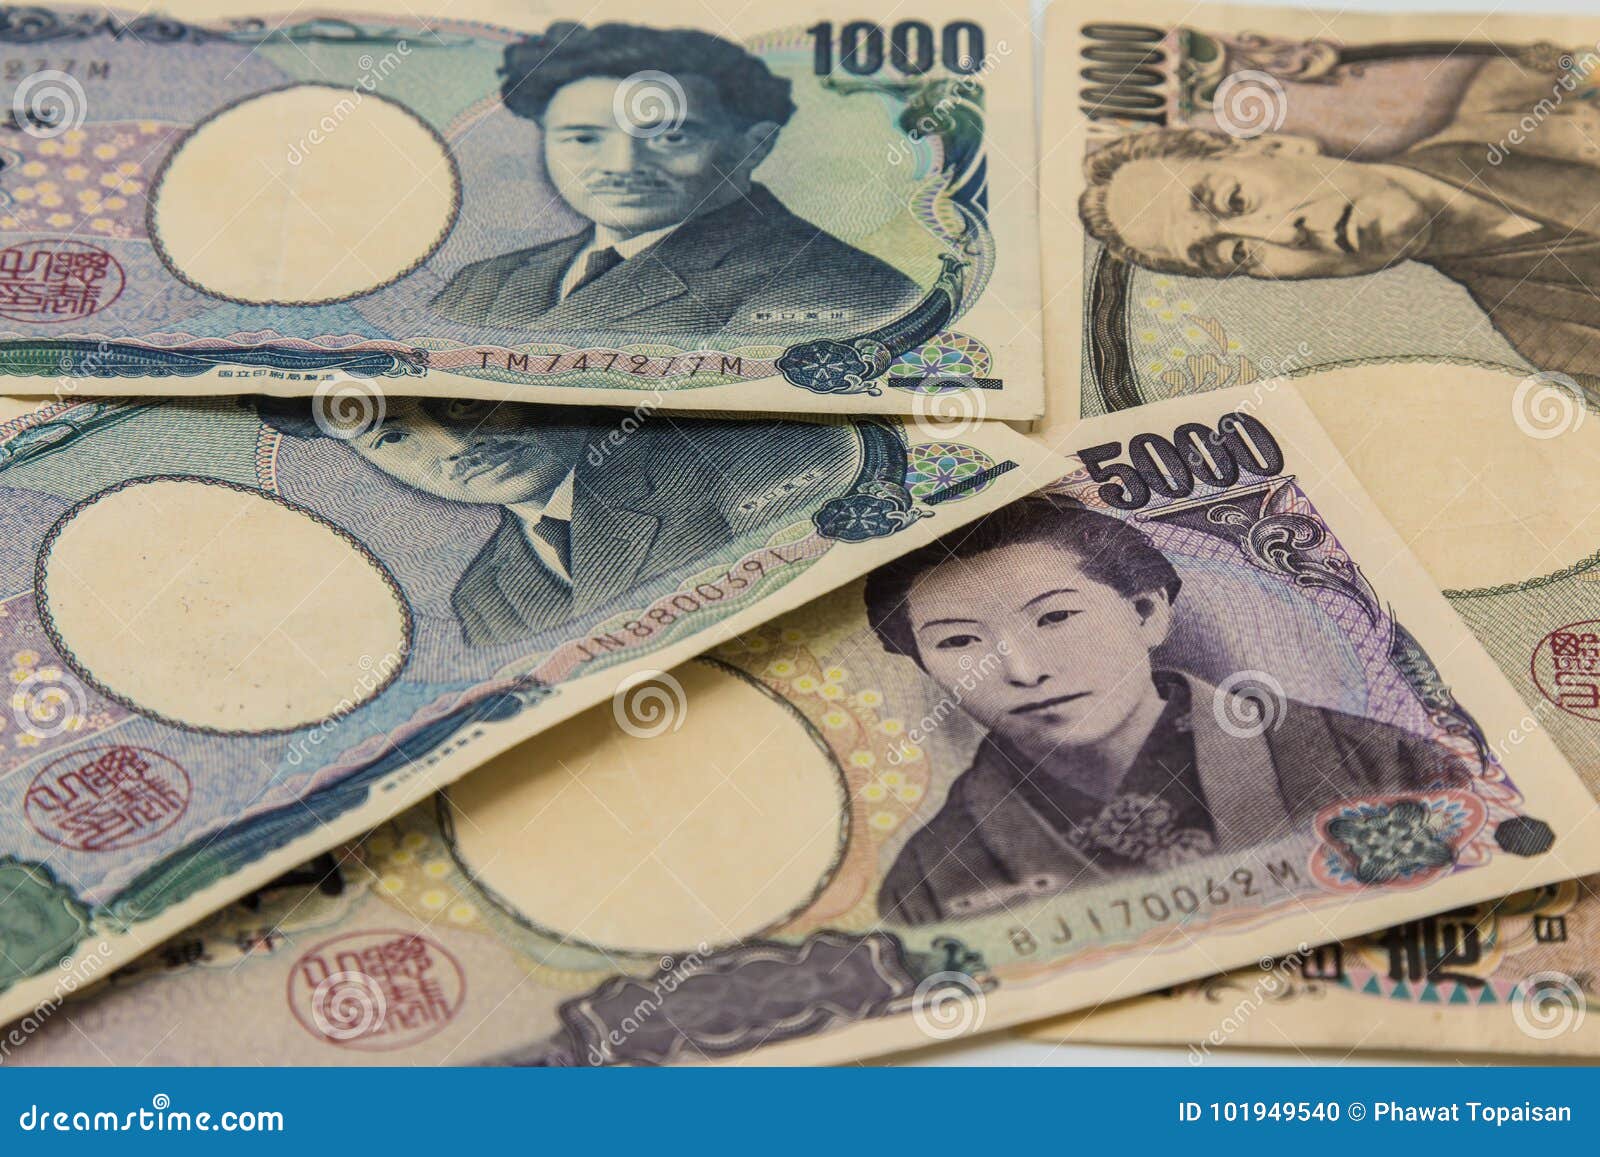 Pile of many type japan banknotes background, yen currency. the currency which Influence on the world economy. money game powers. economy and funds concept.